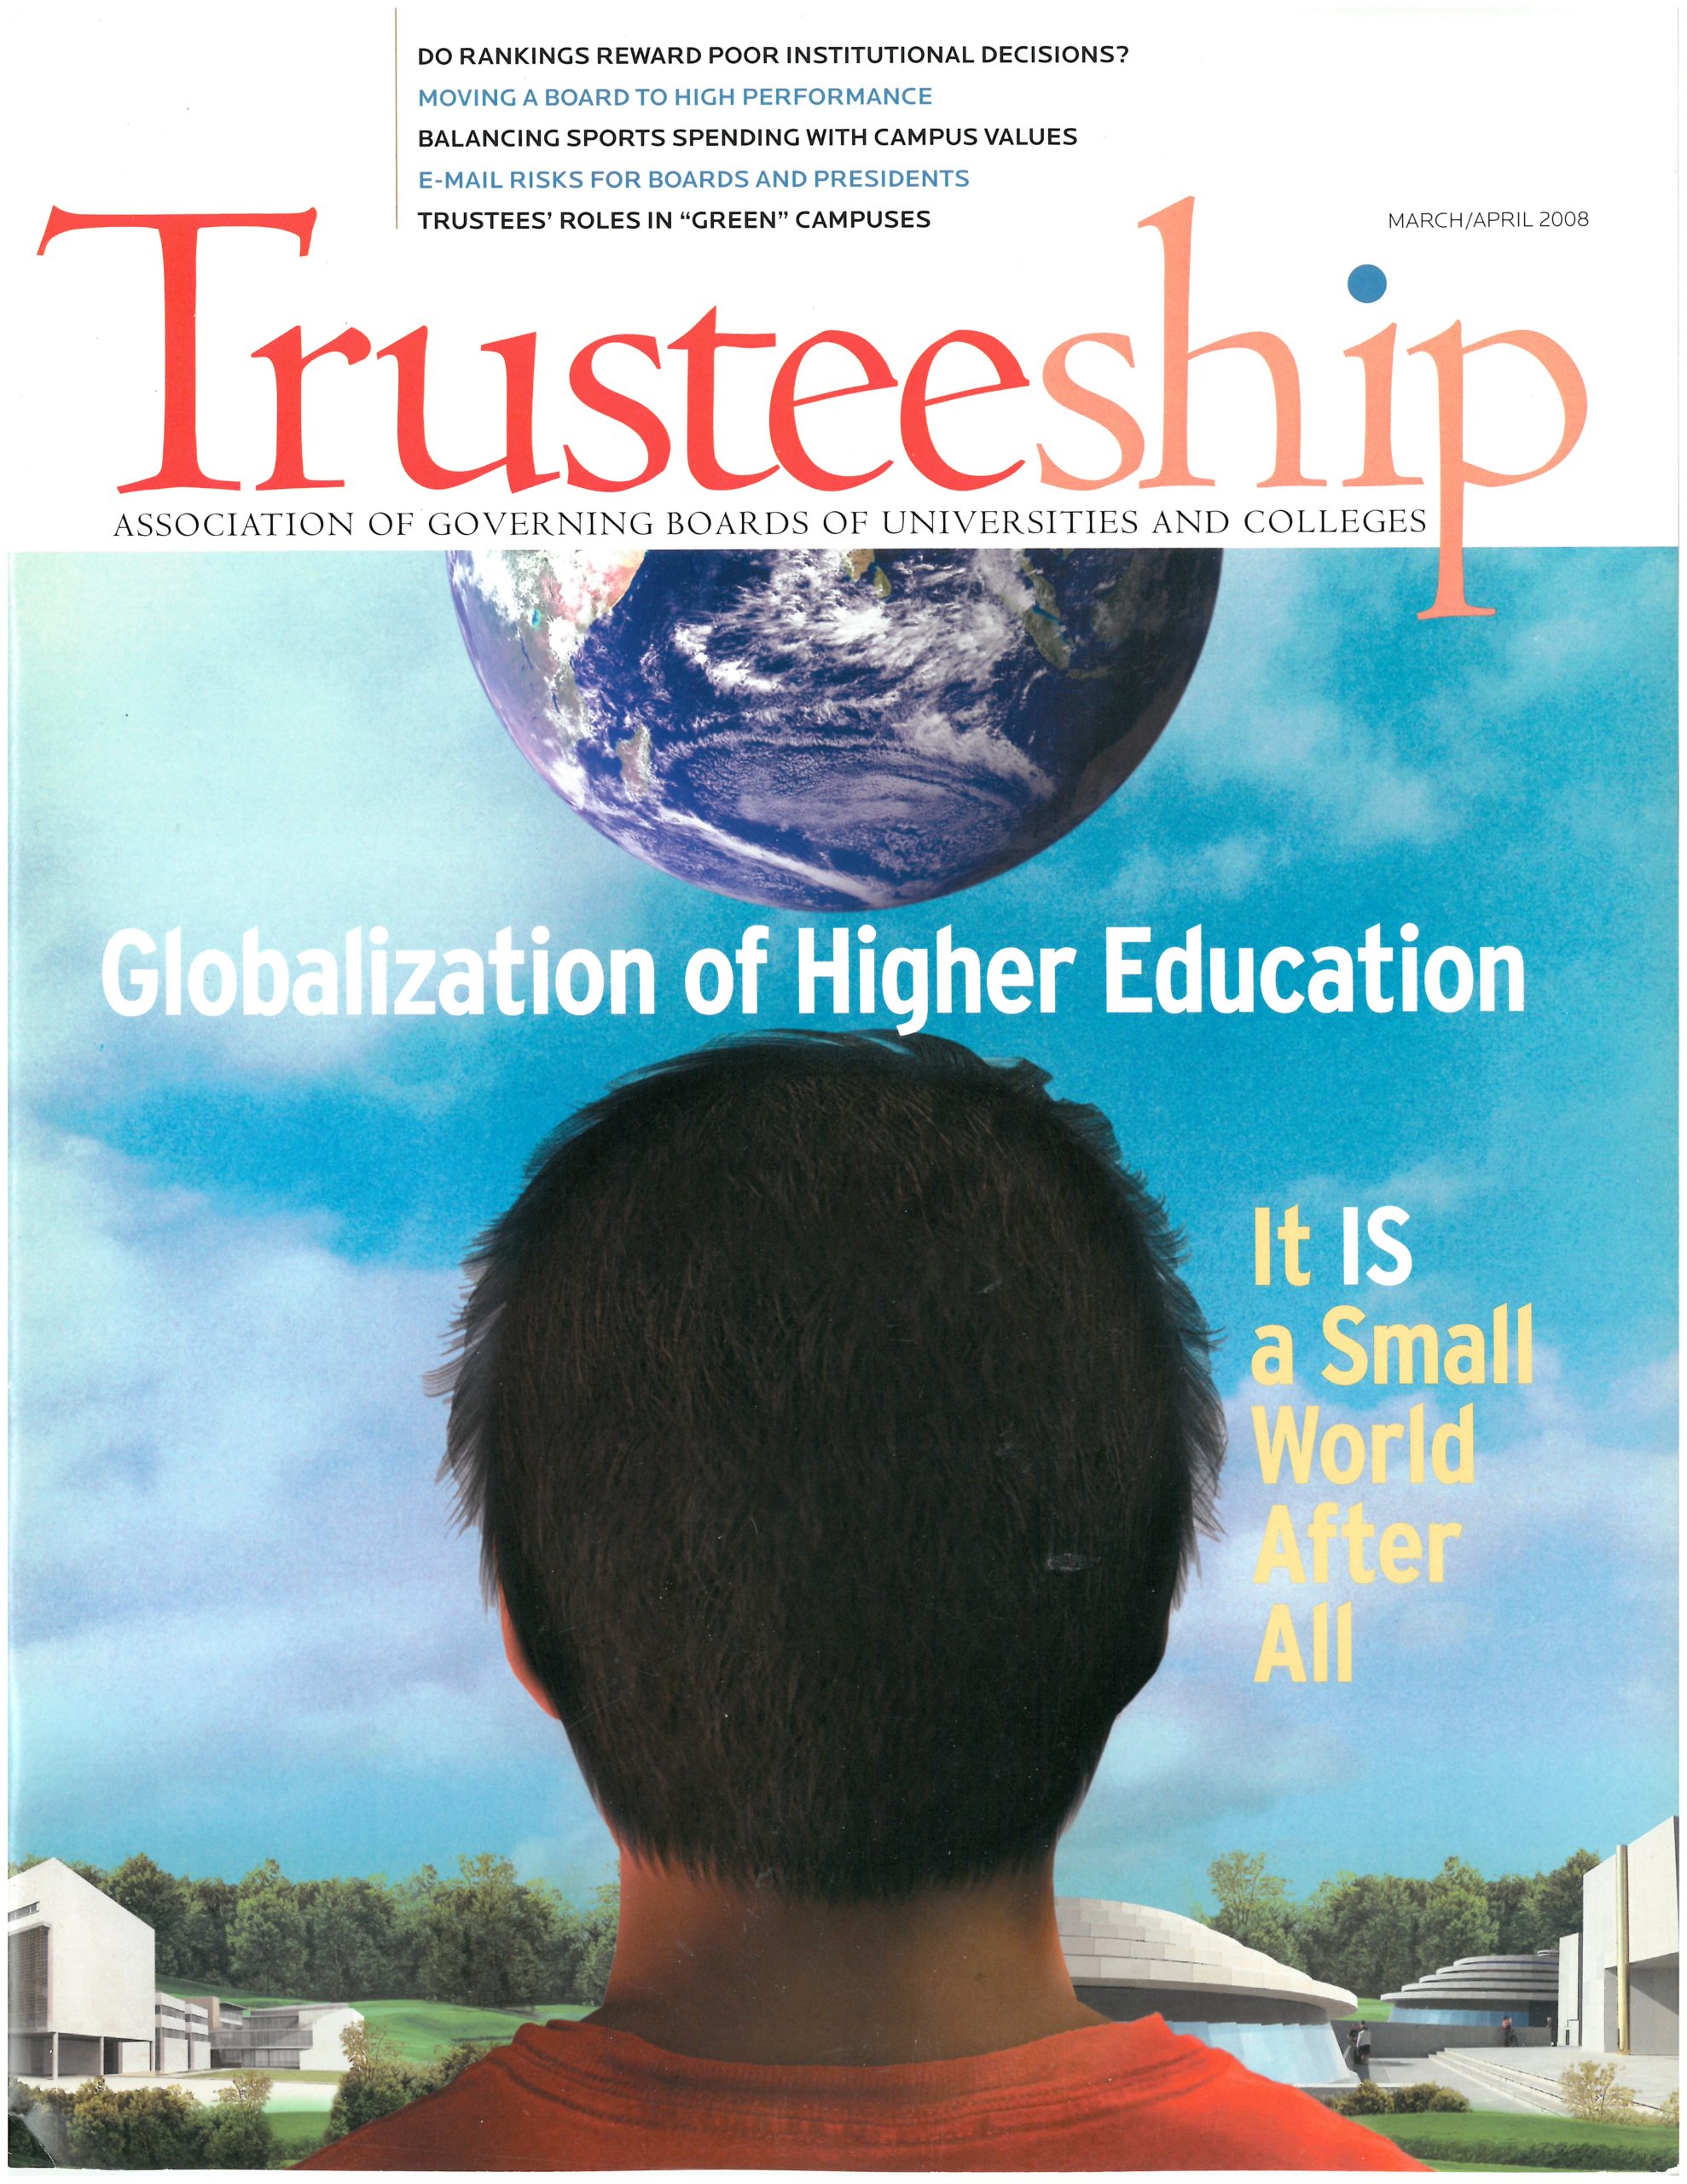 AGB Trusteeship Magazine March/April 2008 with cover article Globalization of Higher Education - It IS a Small World After All"